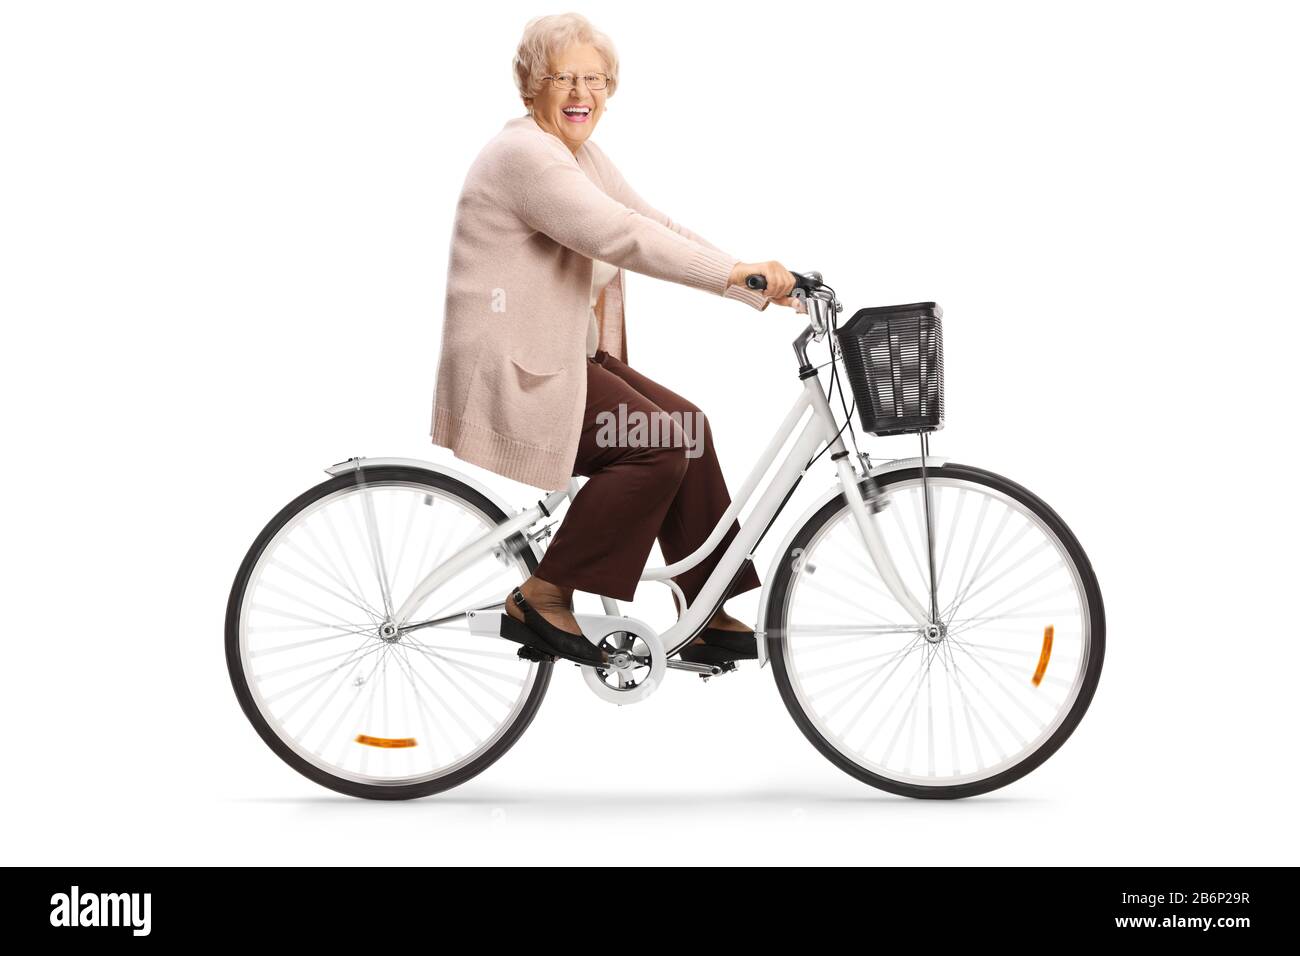 Elderly lady riding a bicycle and smiling at camera isolated on white background Stock Photo